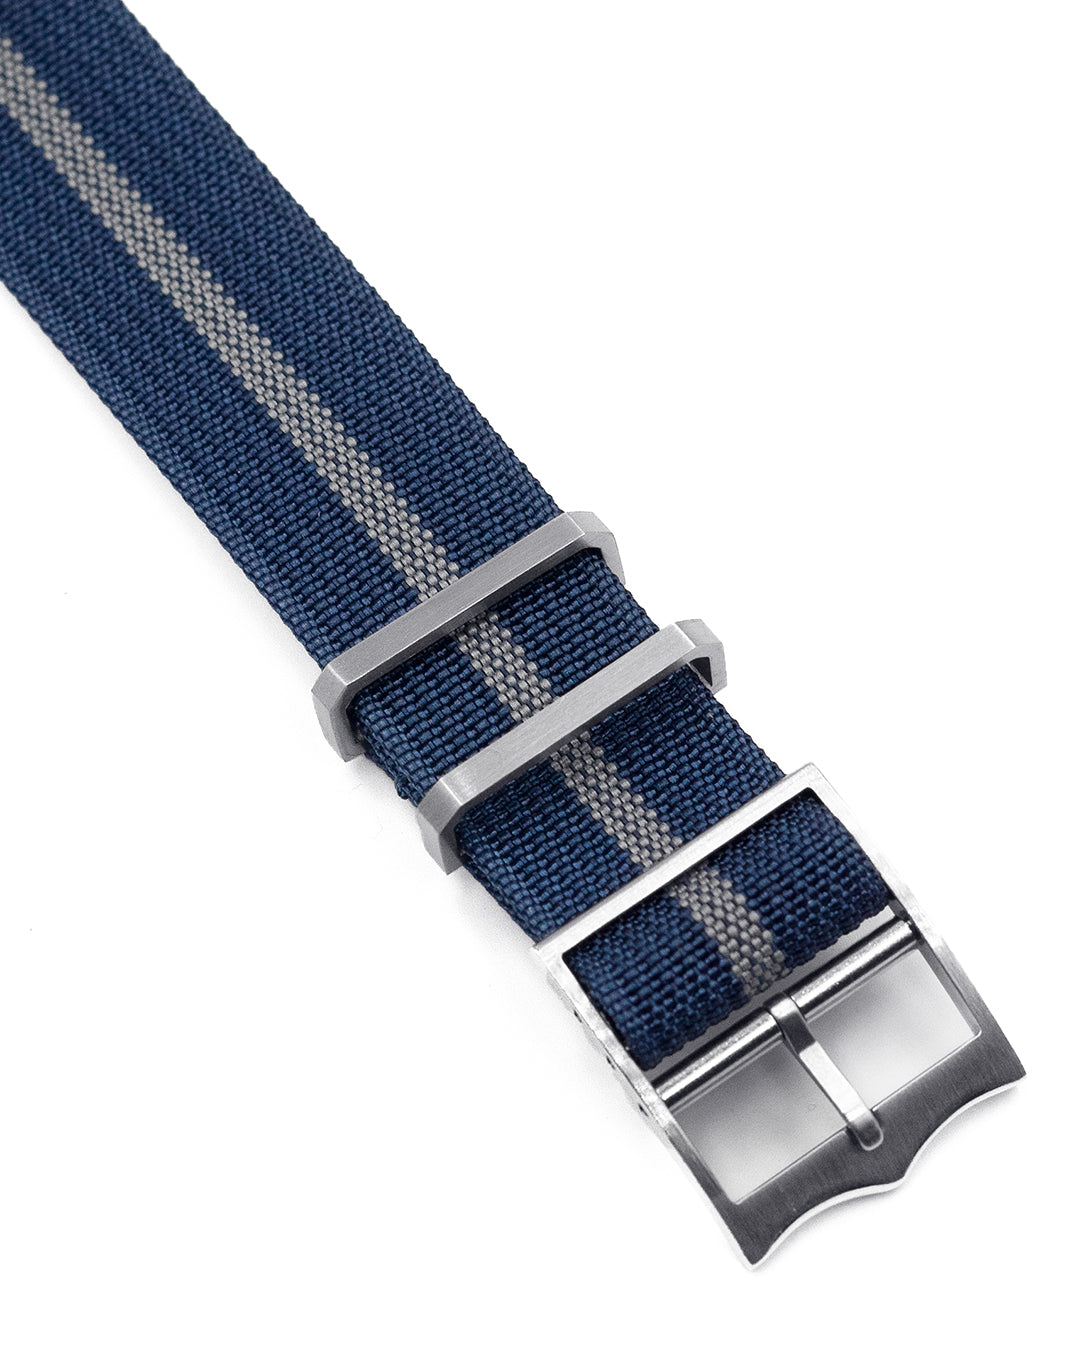 Check this out:Nylon strap with buckle